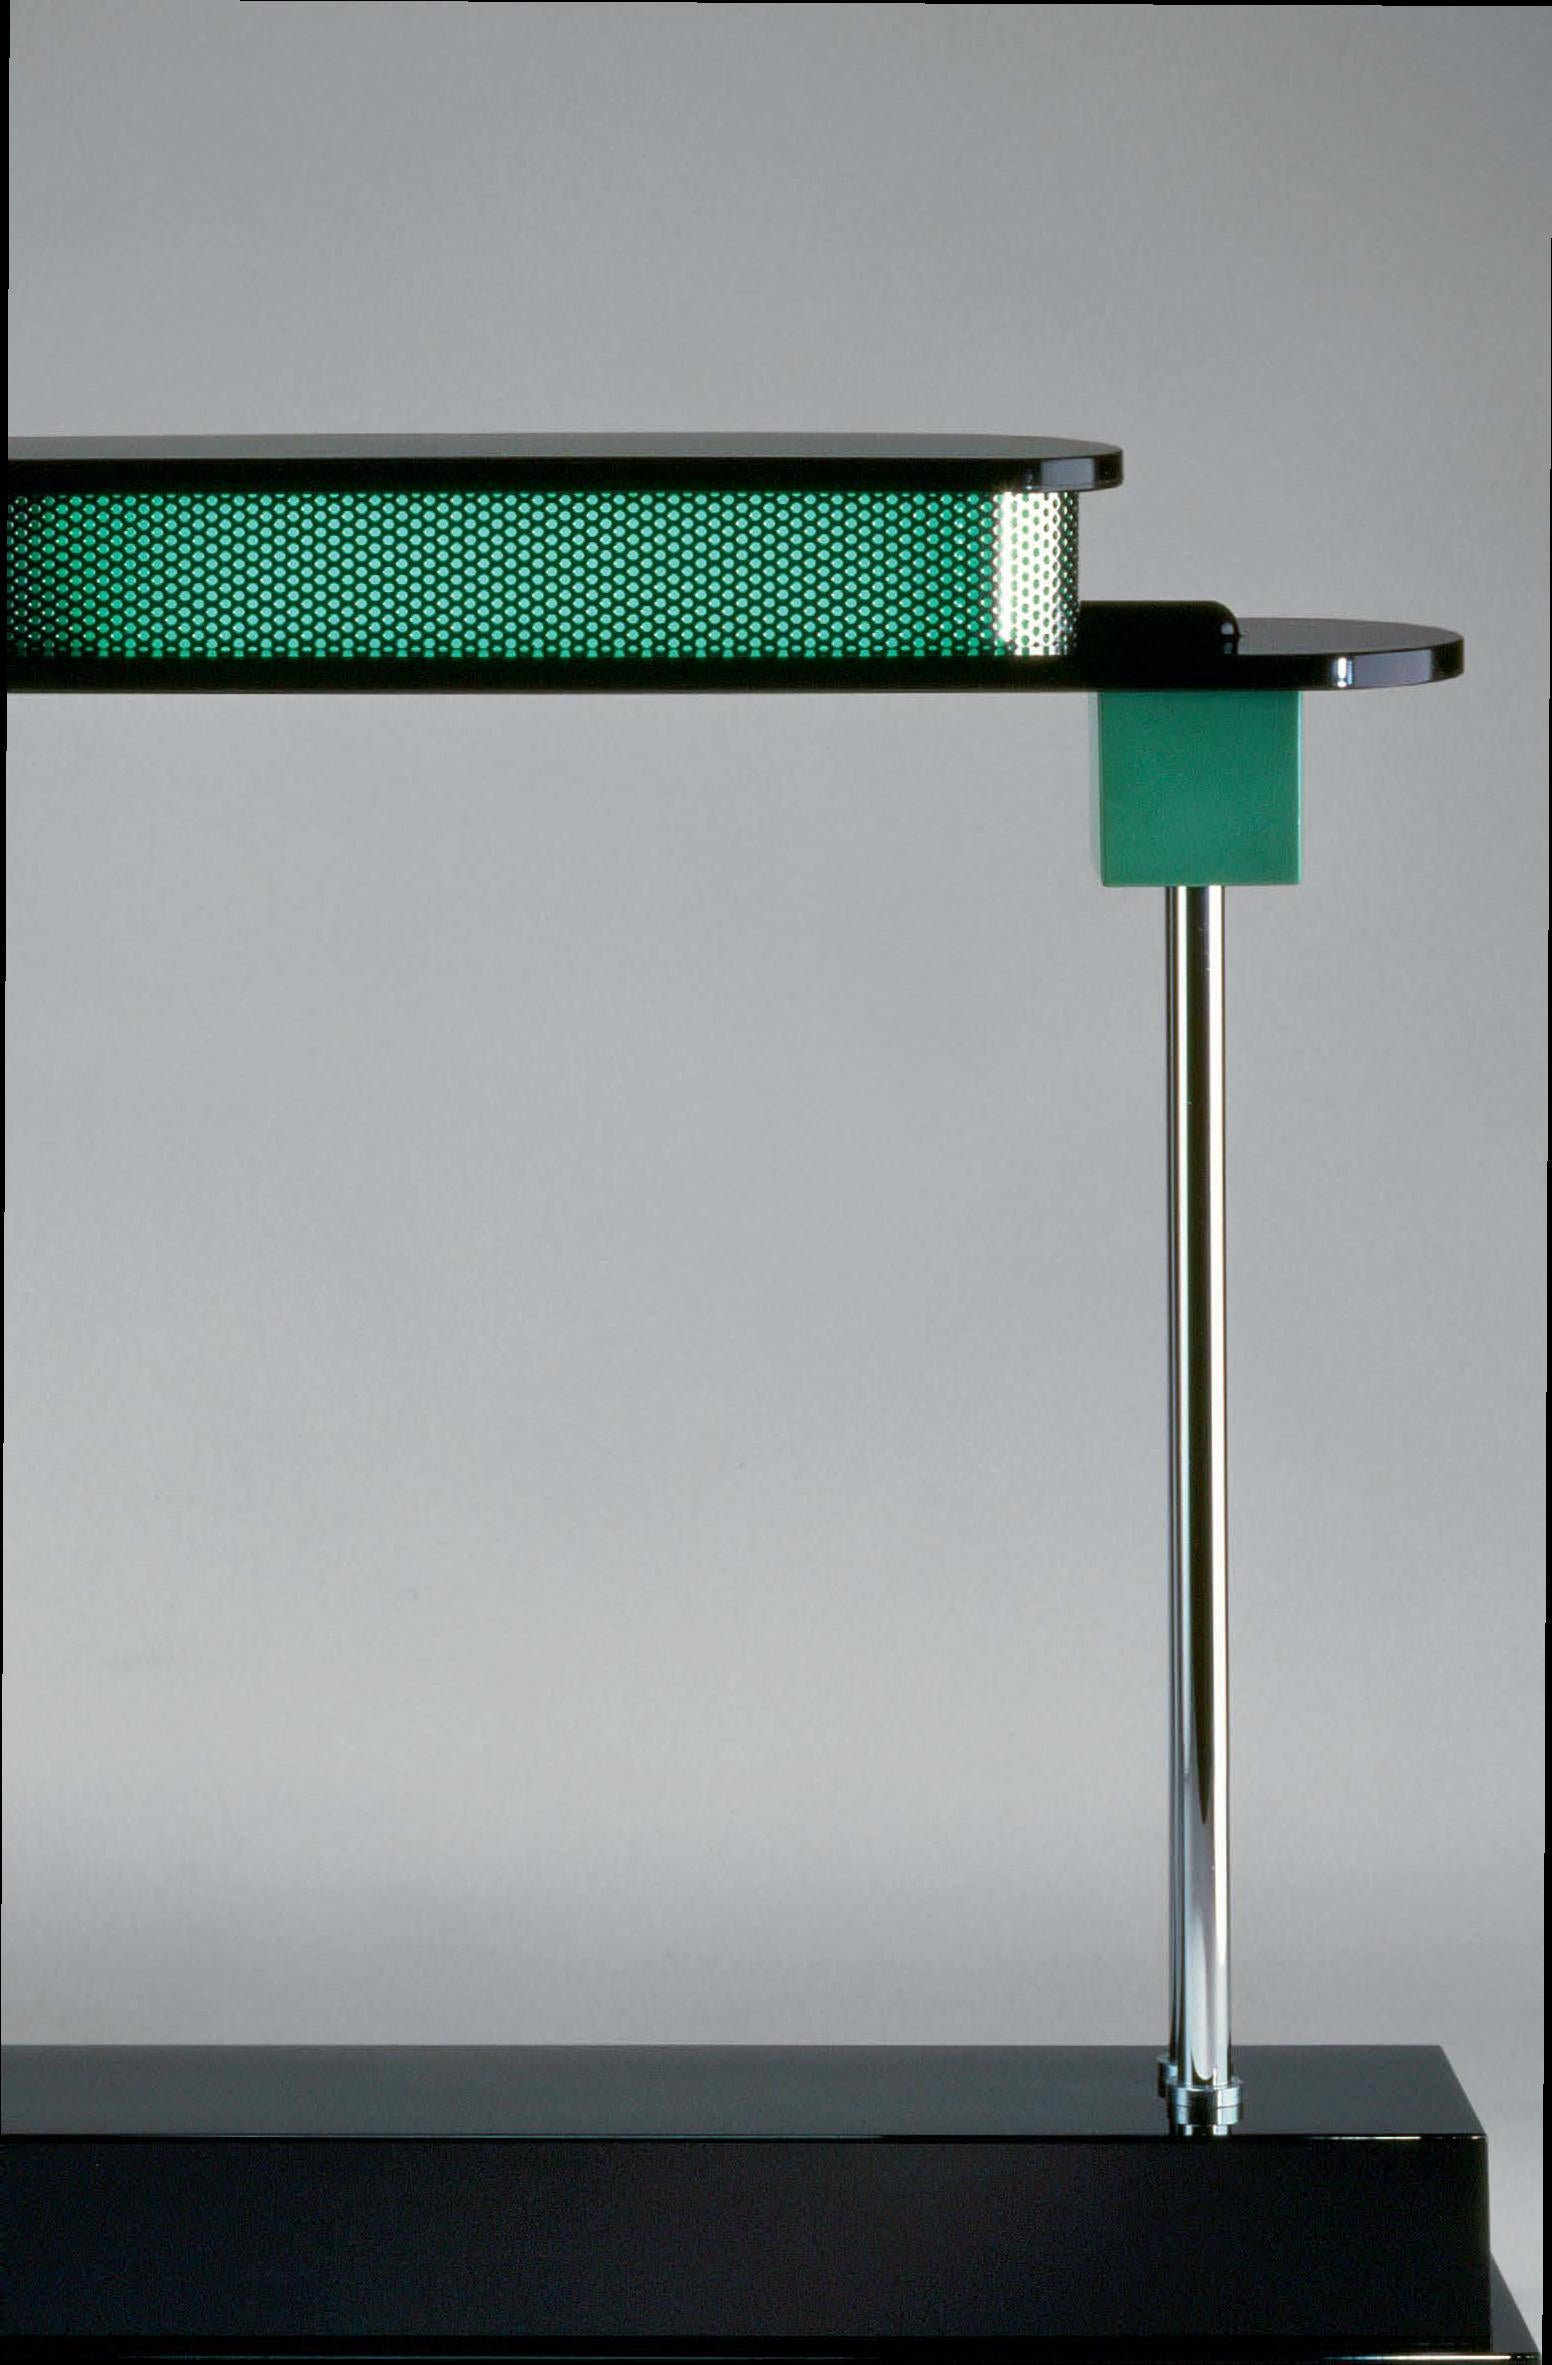 Artemide Pausania LED table lamp in black and green by Ettore Sottsass.
 
The godfather of contemporary Italian design, Ettore Sottsass believed products should be as sensual as functional. Trained as an architect, Sottsass was a founding member of